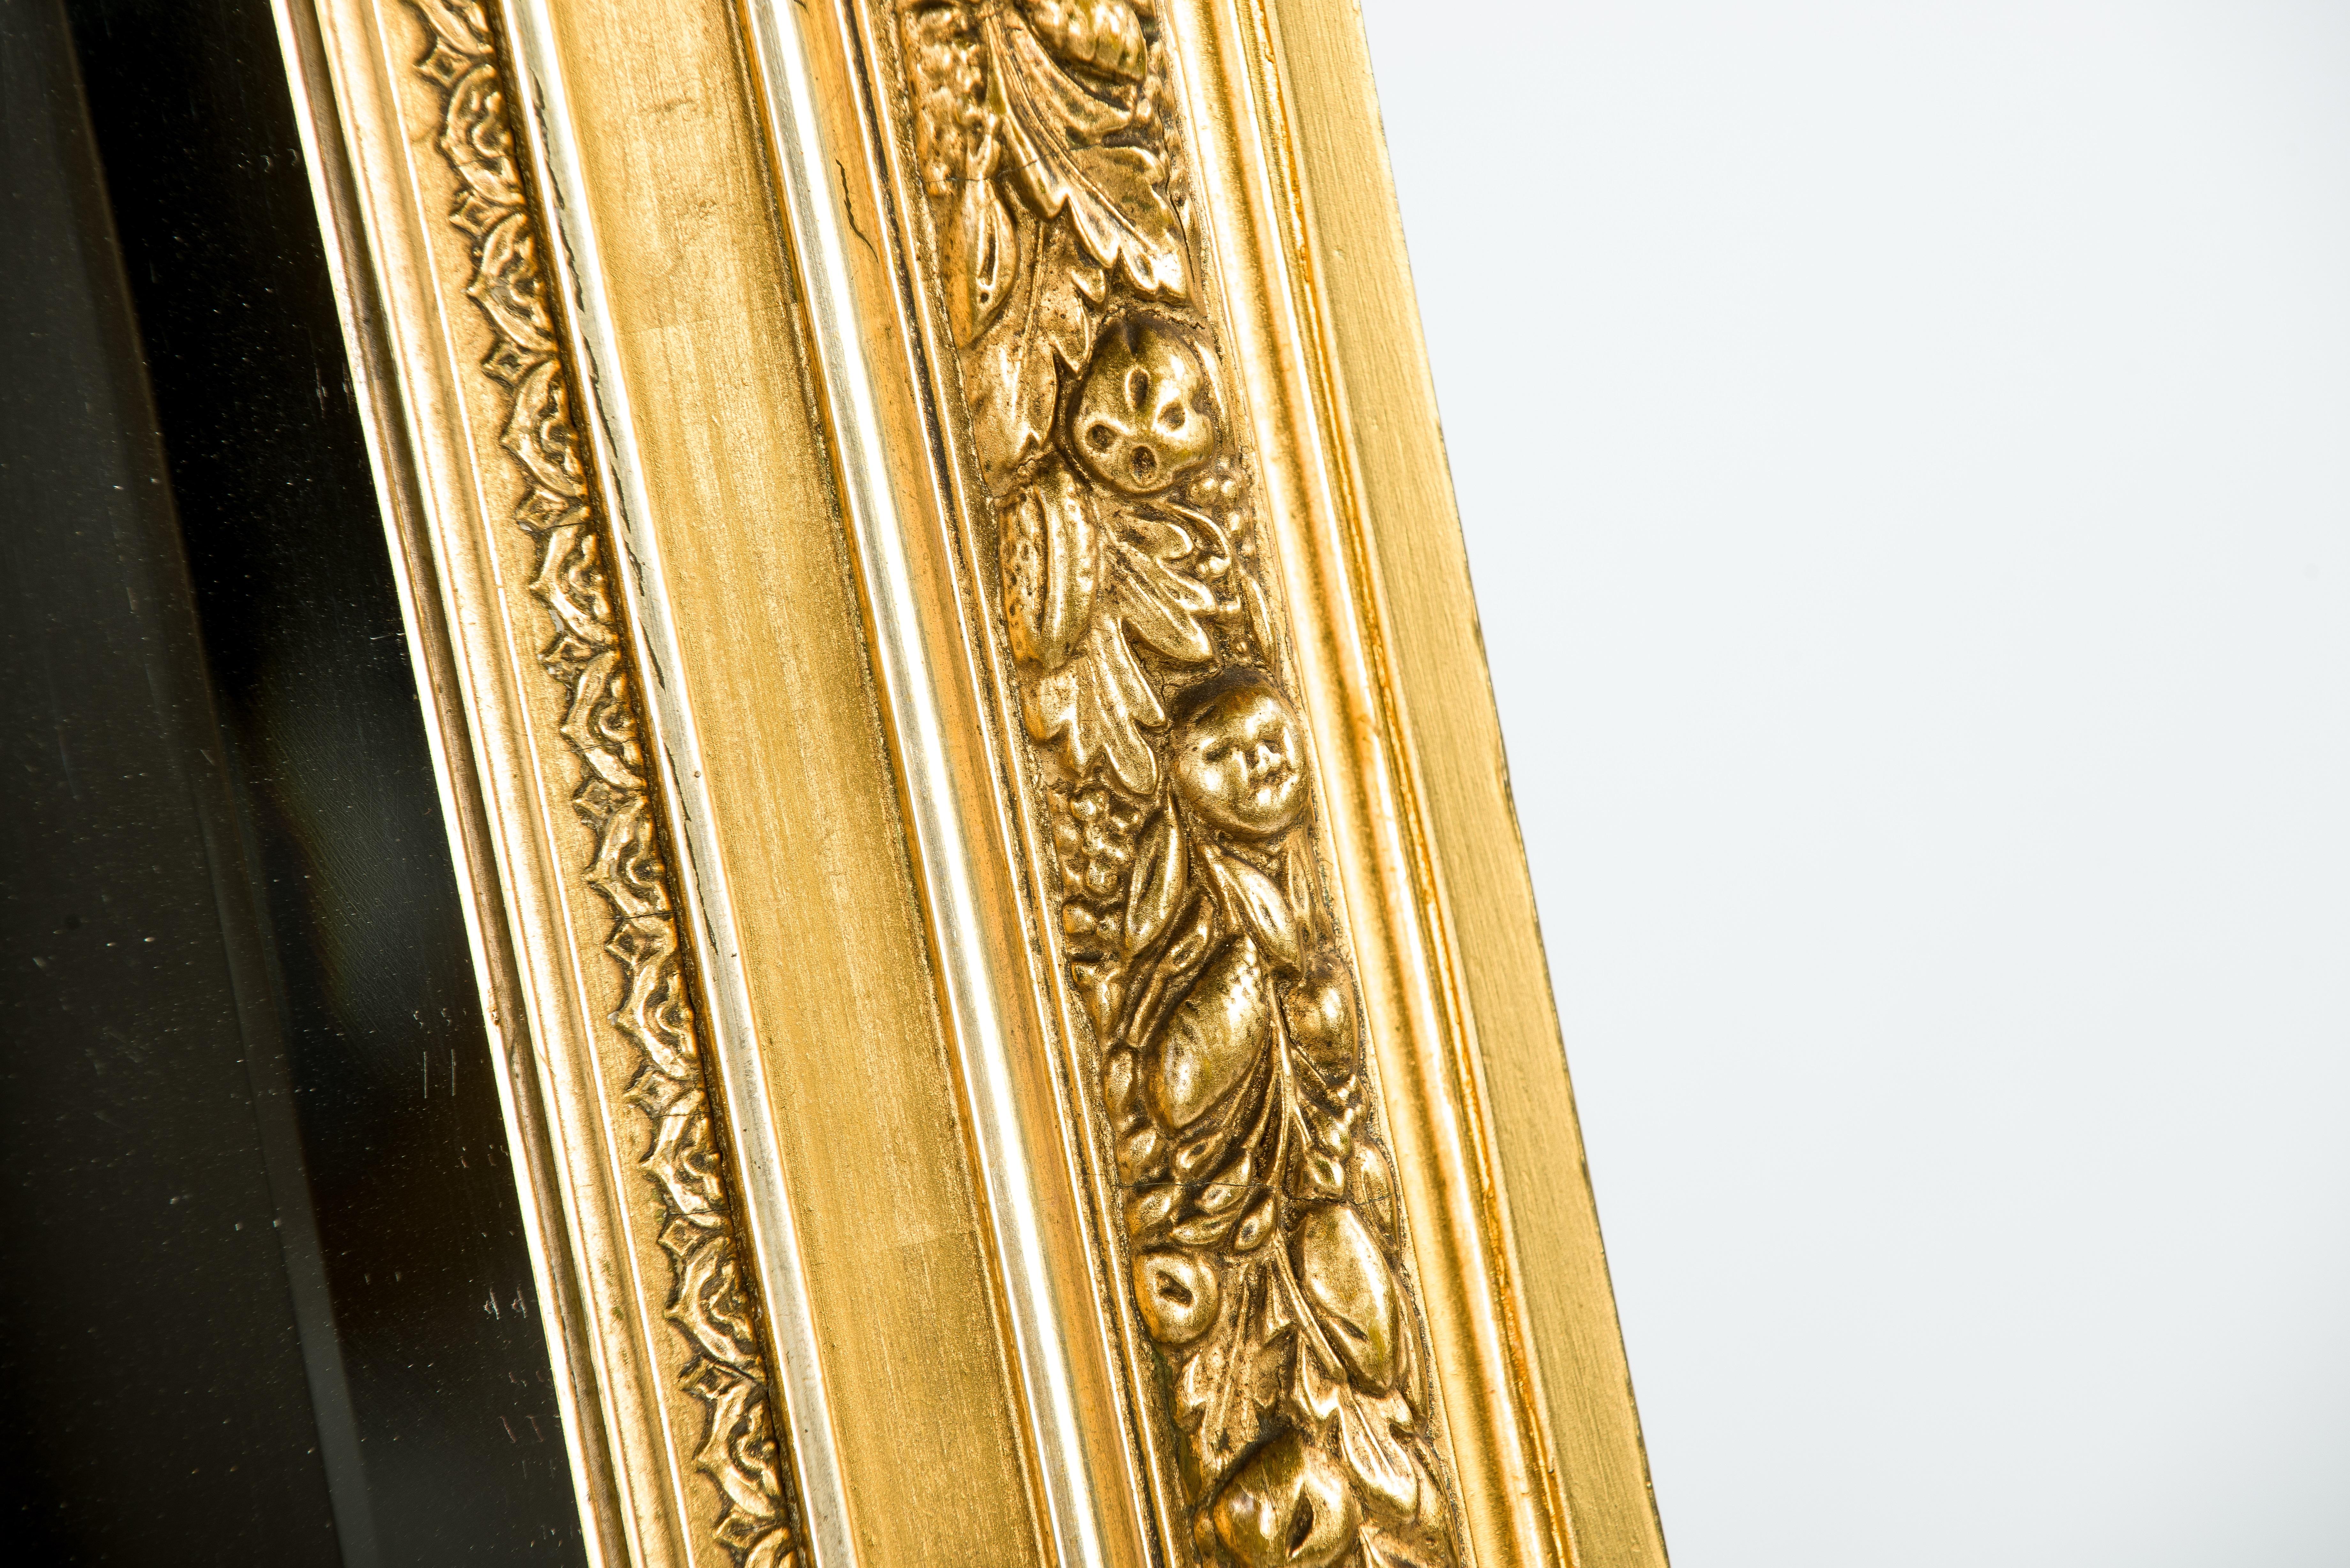 Large Antique 19th Century Gold Gilt French Louis XVI Mirror with Crest 6